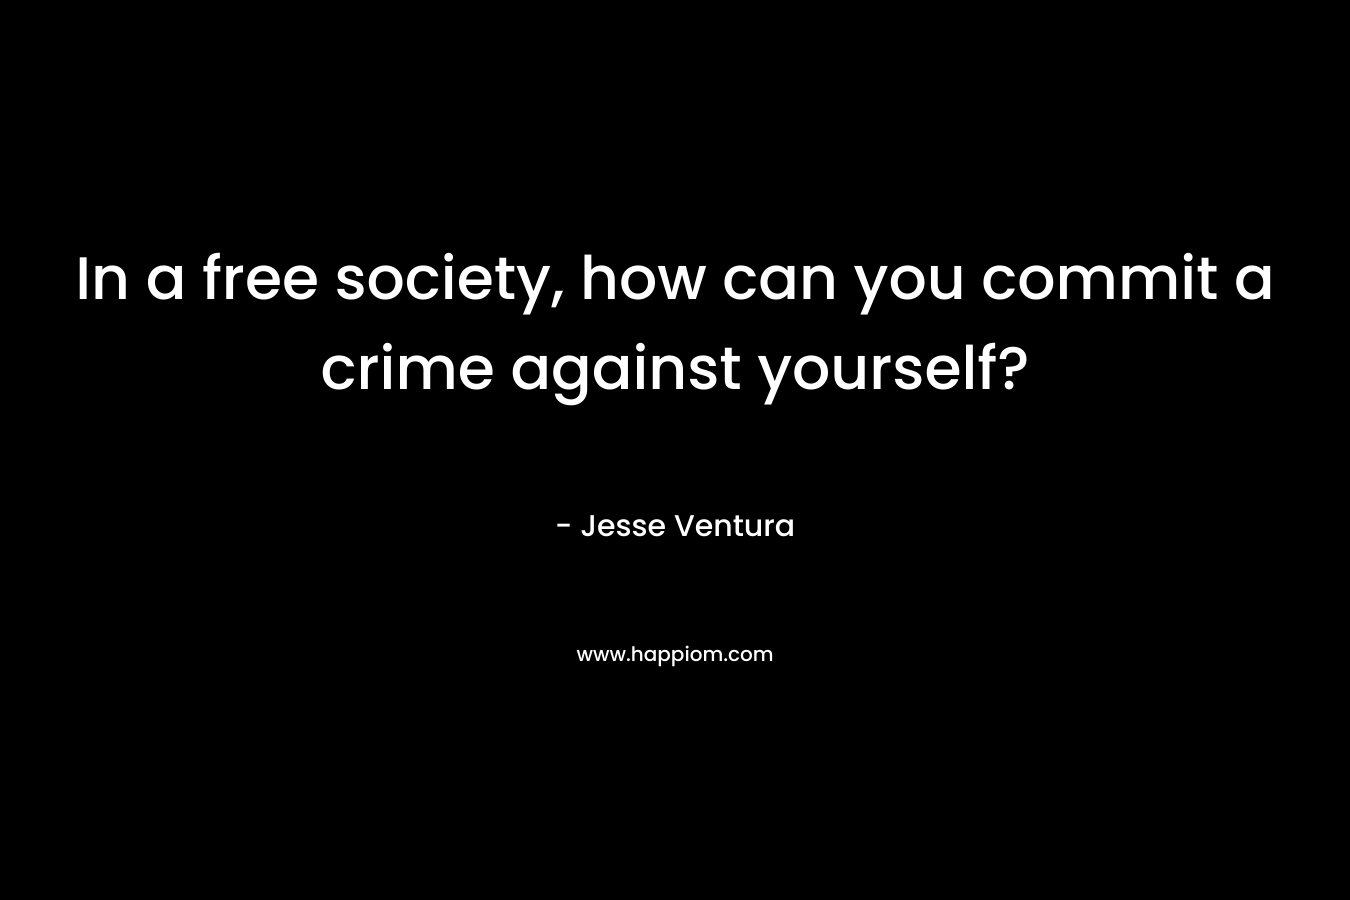 In a free society, how can you commit a crime against yourself? – Jesse Ventura